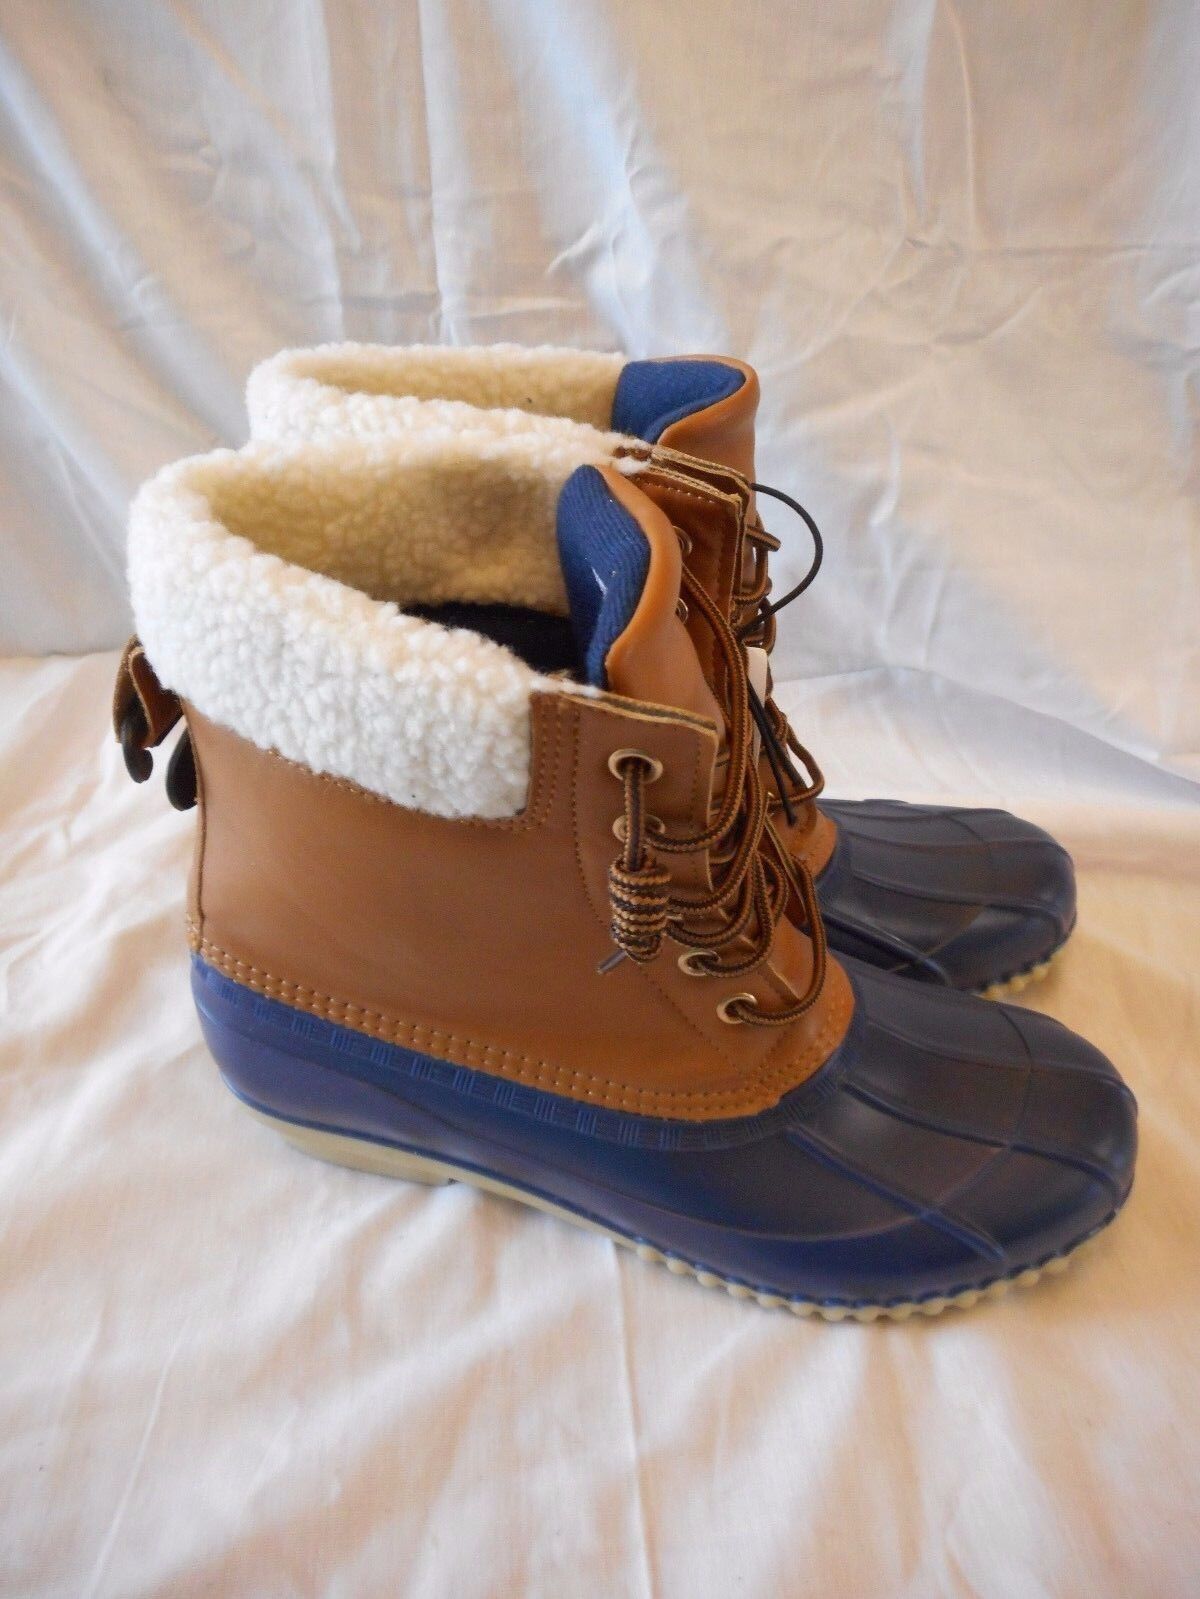 Primary image for Women's Rue 21 Blue & Brown Rubber Boots Size Large 8/9 NEW Water Resistant